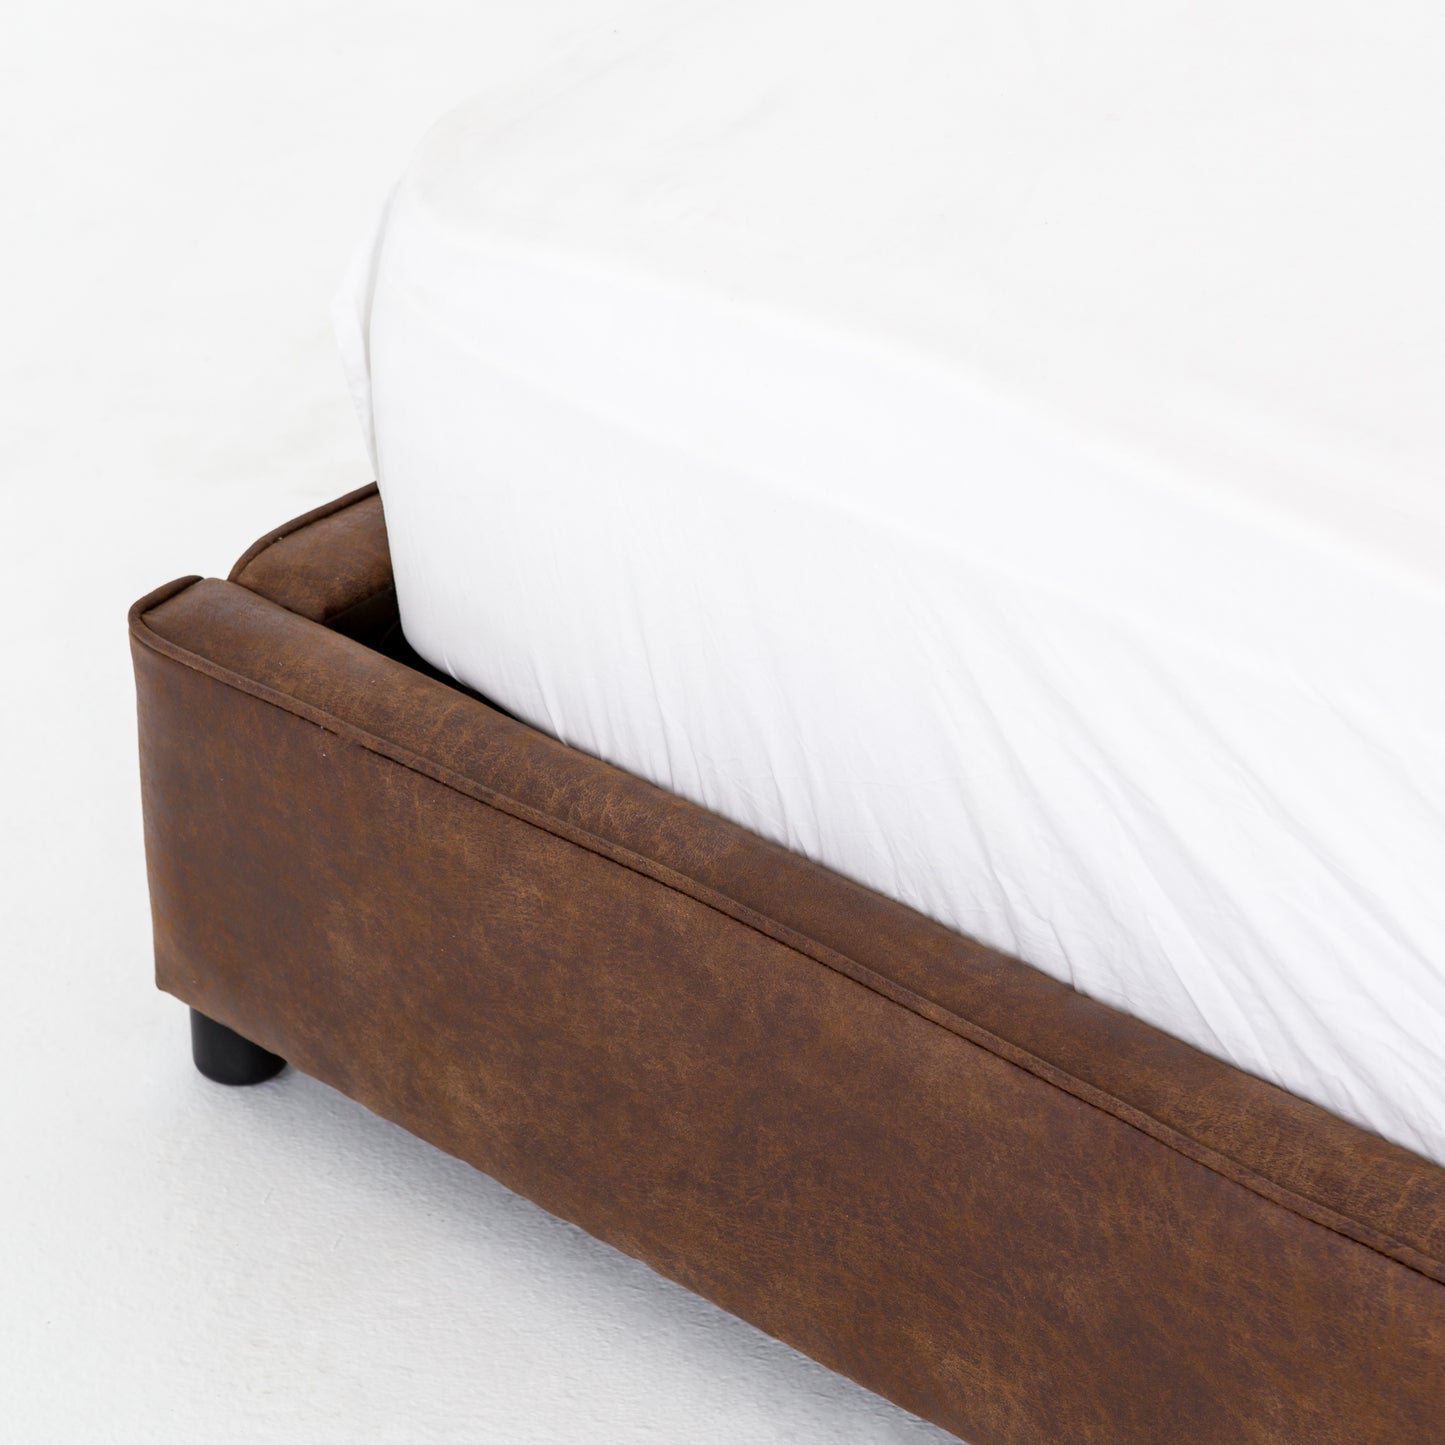 arteriors aidan bed vintage tobacco leather angle detail